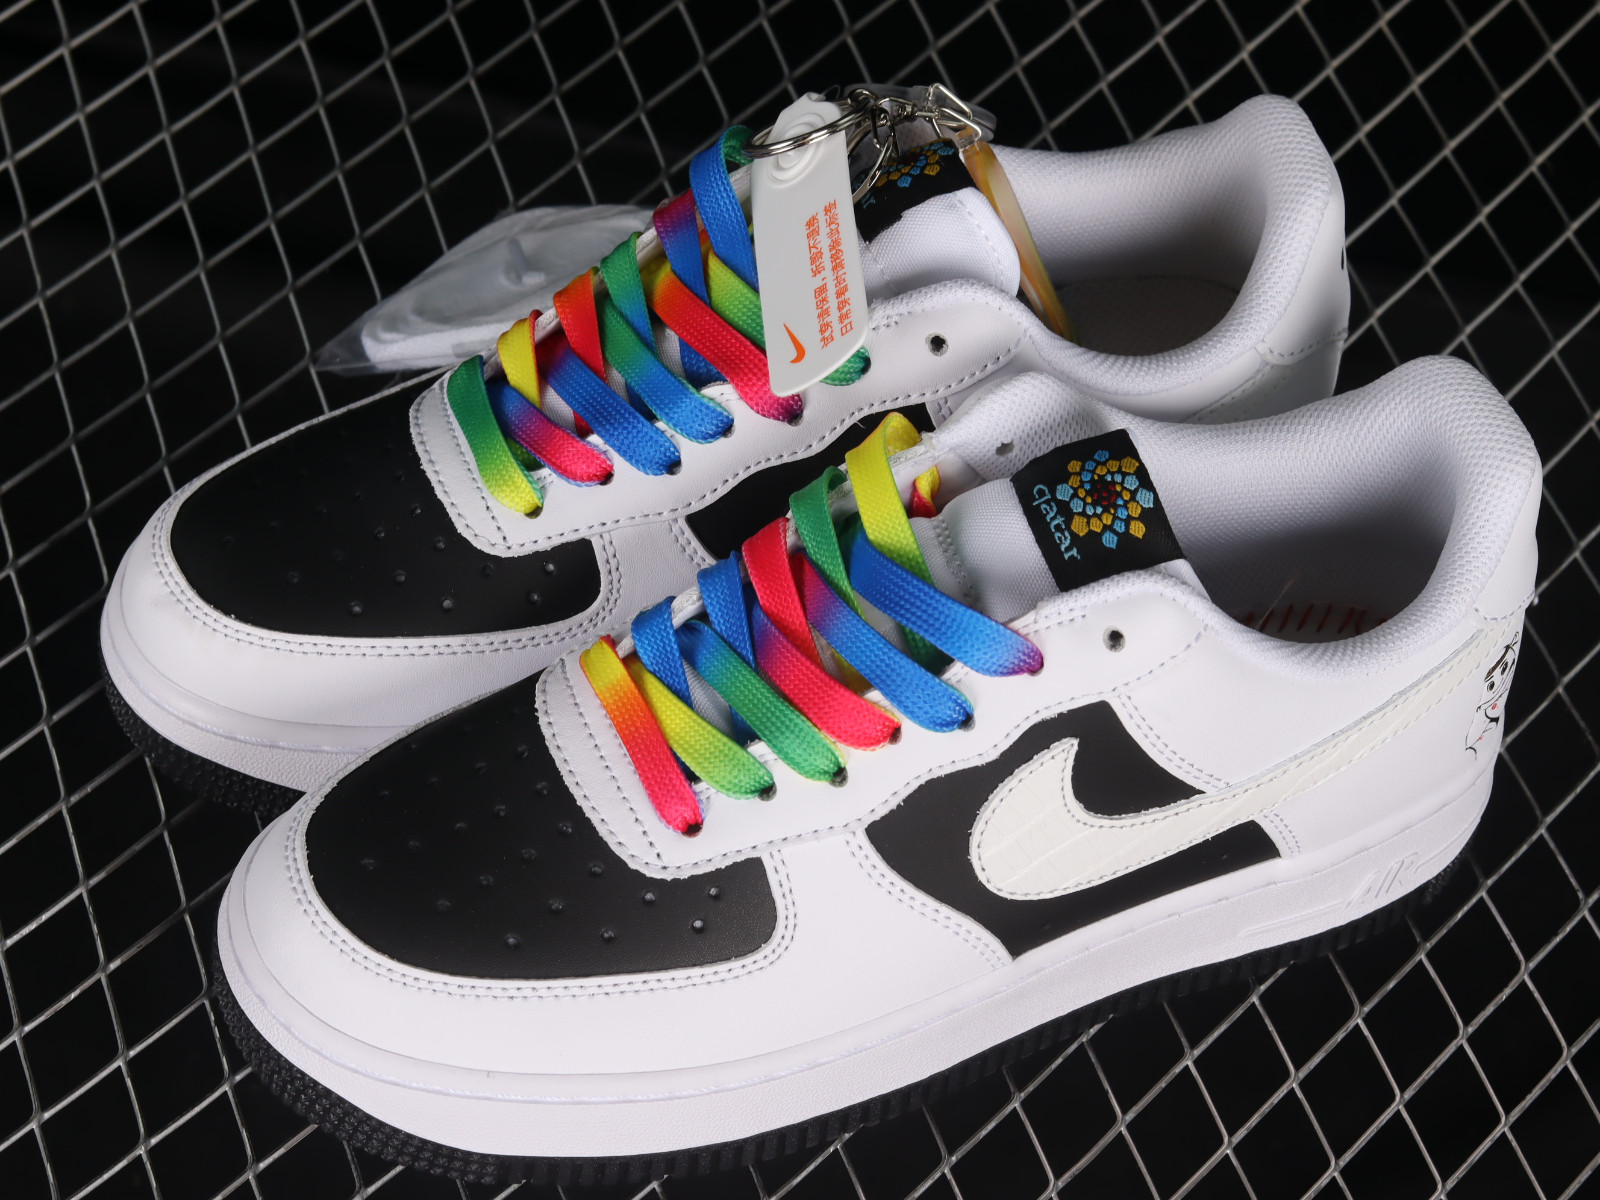 998 - Color DN1990 - MultiscaleconsultingShops nike air ship 1985 jordan 1 pack release date Nike Air 1 07 Low White Black Multi